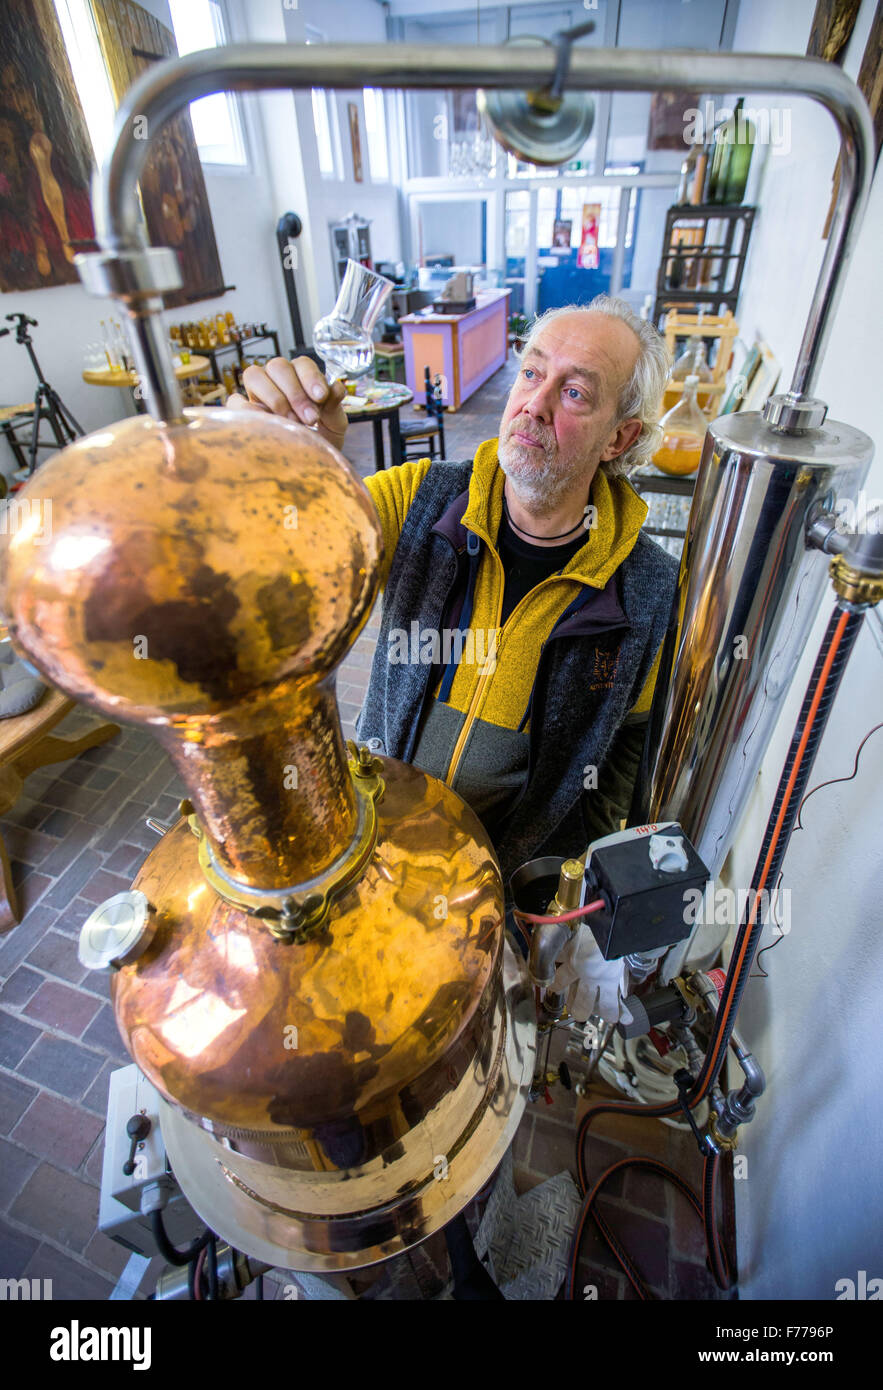 Kluetz, Germany. 24th Nov, 2015. Johann Volk checks the clarity of a seabuckthorn spirit at the still in the new Kluetzer Edelbrand Destille distillery in Kluetz, Germany, 24 November 2015. A bottling plant and art gallery have been operating at the former dairy for years. Since the last few days, 8 brandies and 6 liqueurs are also being produced here. In early 2016, the small business plans to expand with a second, larger distillery. PHOTO: JENS BUETTNER/LMV/dpa/Alamy Live News Stock Photo